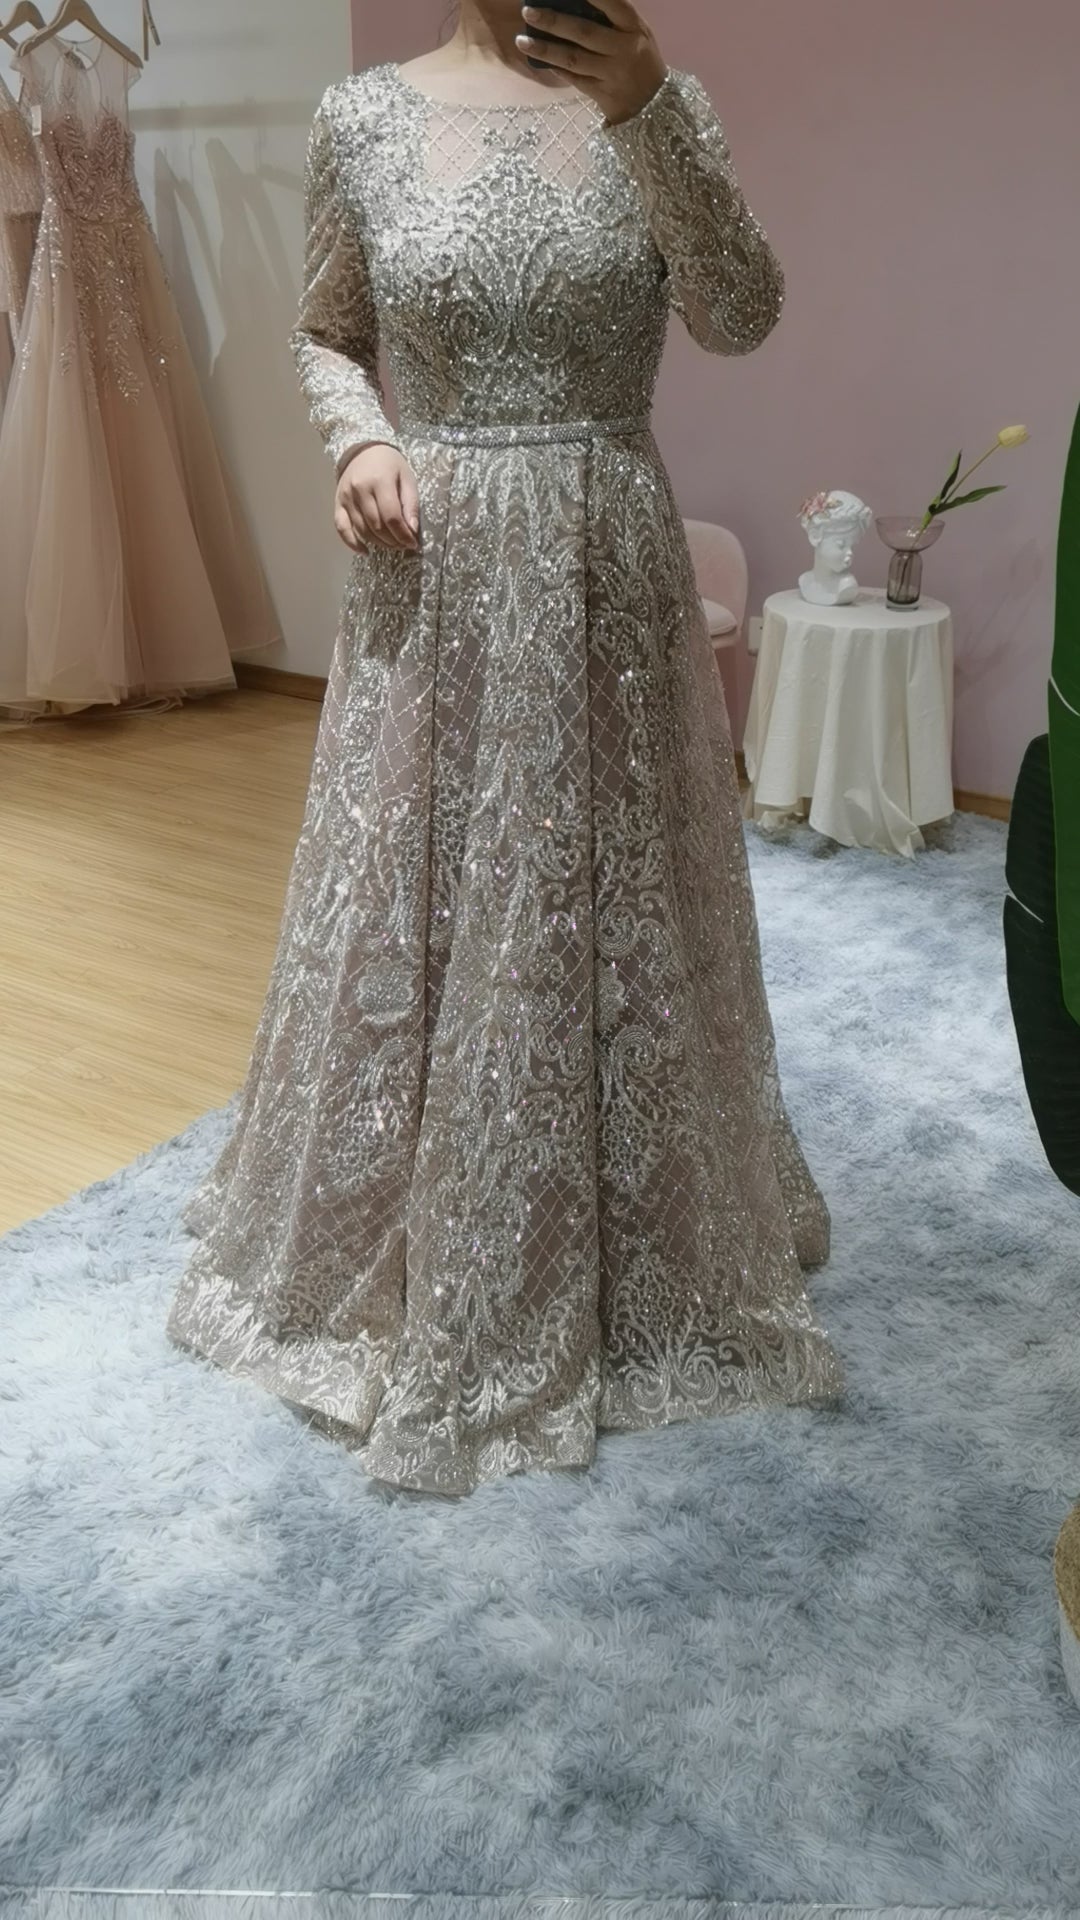 Dreamy Vow Elegant Nude Muslim Evening Dress Long Sleeve Luxury Crystal Dubai Plus Size Women Formal Dresses for Wedding Guest Party SS191